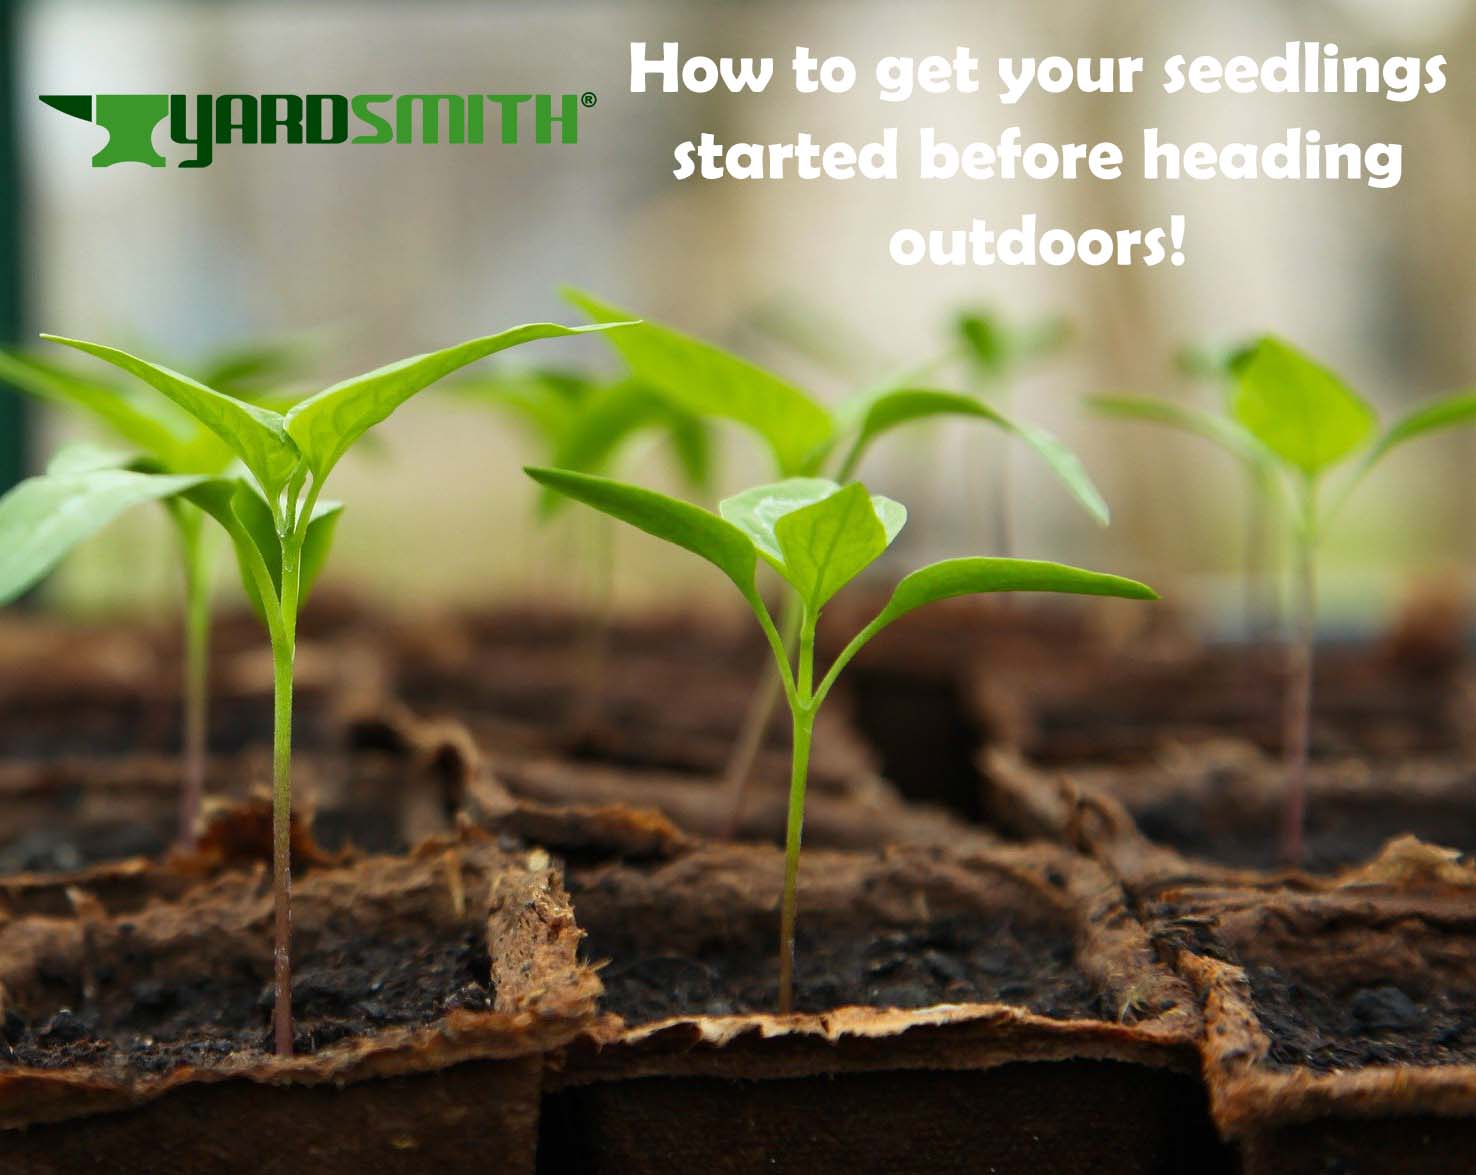 How To Get Your Seedlings Started Before Heading Outdoors